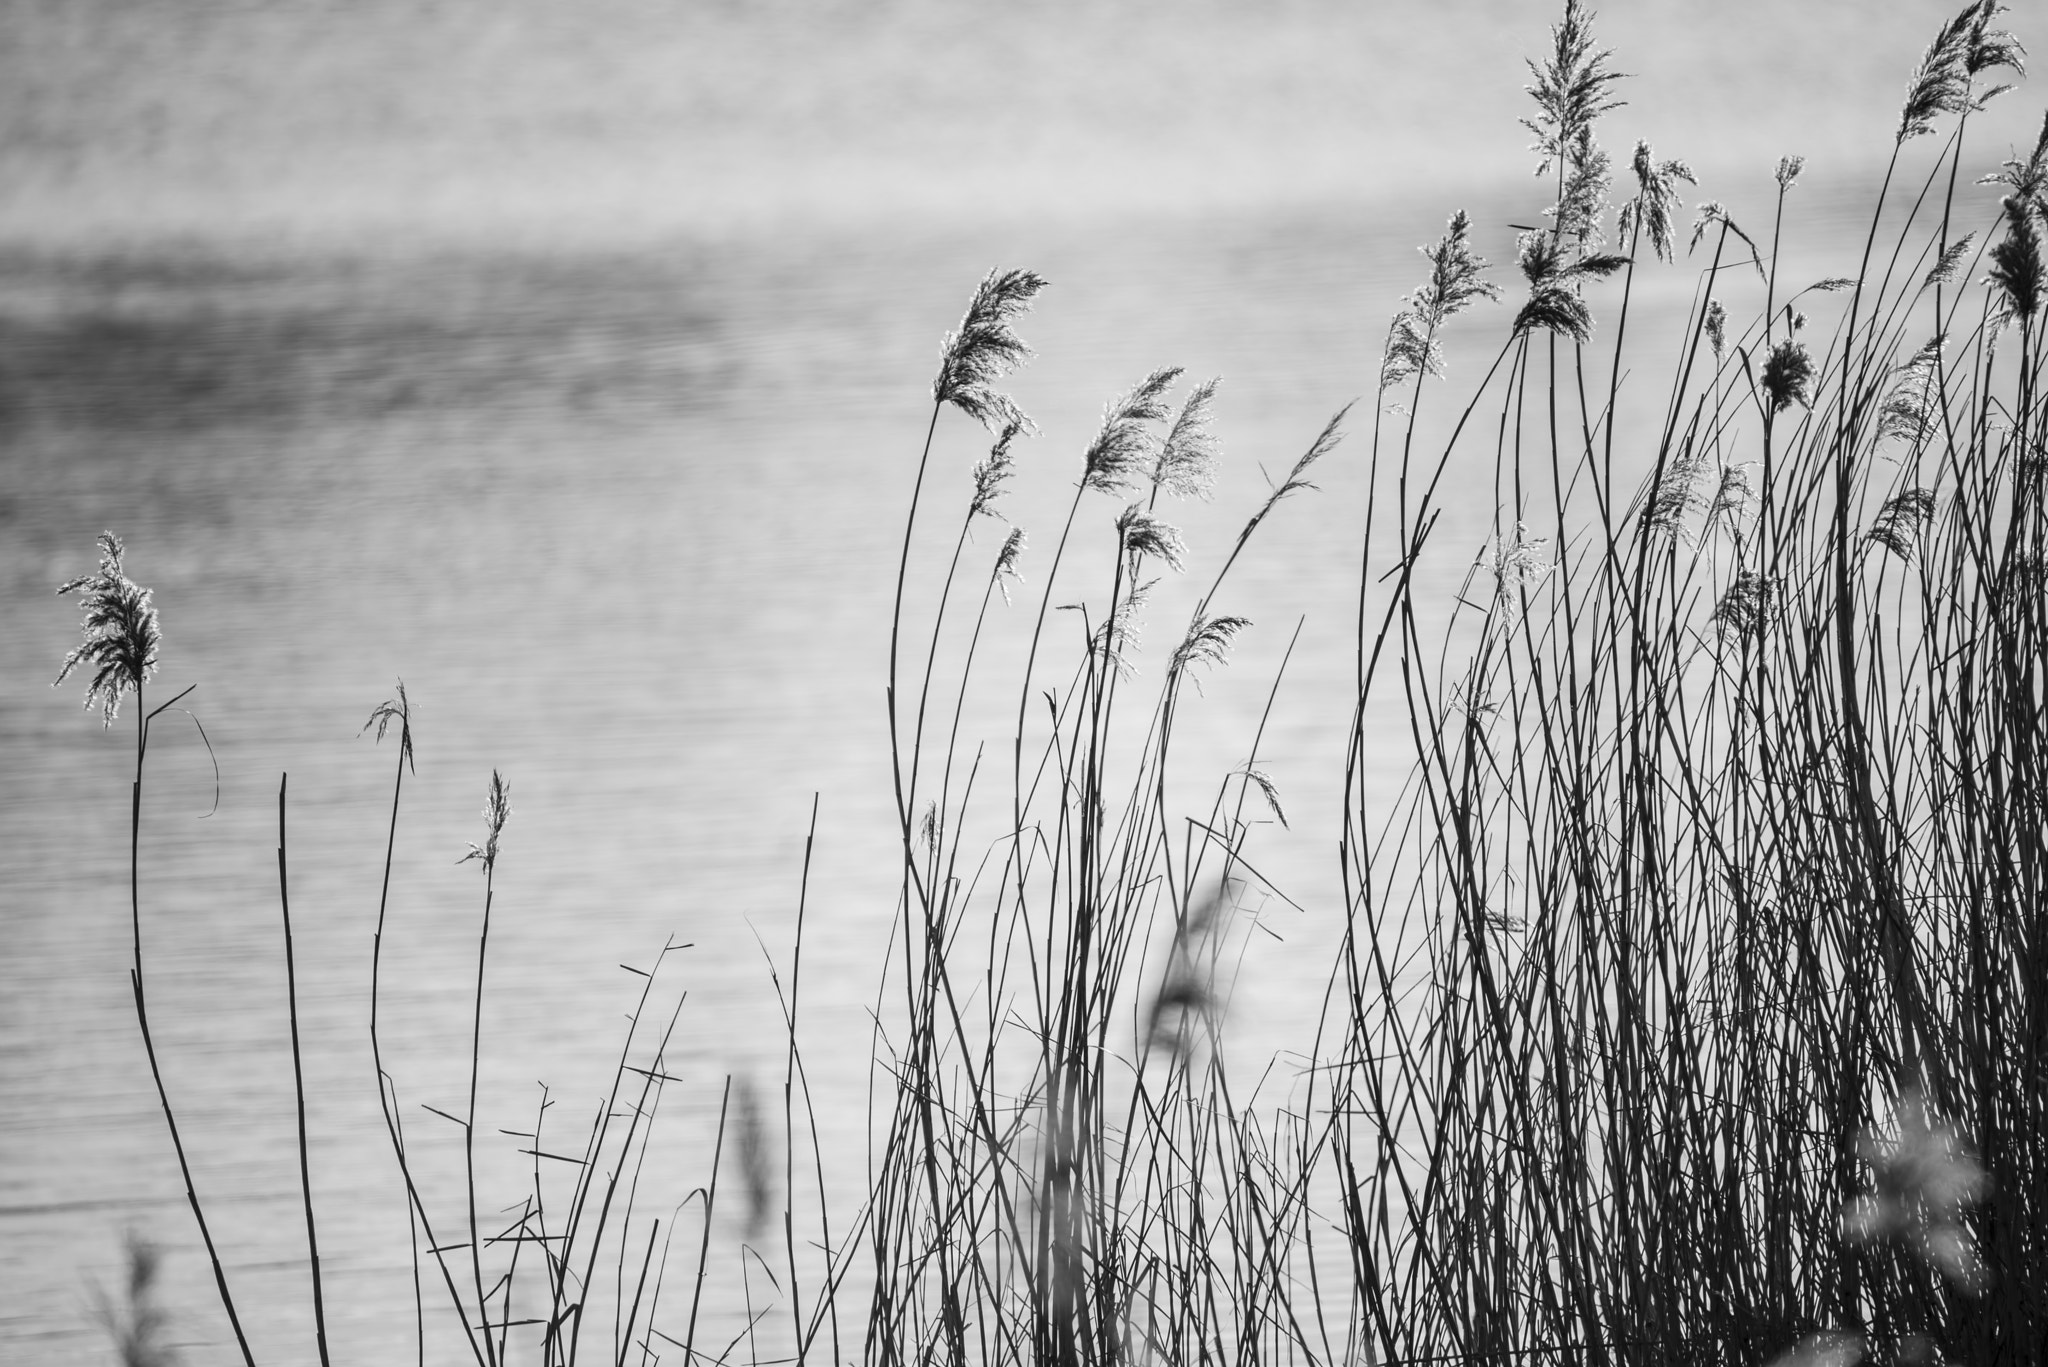 Nikon D800 + Sigma 150-600mm F5-6.3 DG OS HSM | C sample photo. Beautiful black and white landscape image of reeds in winter lak photography